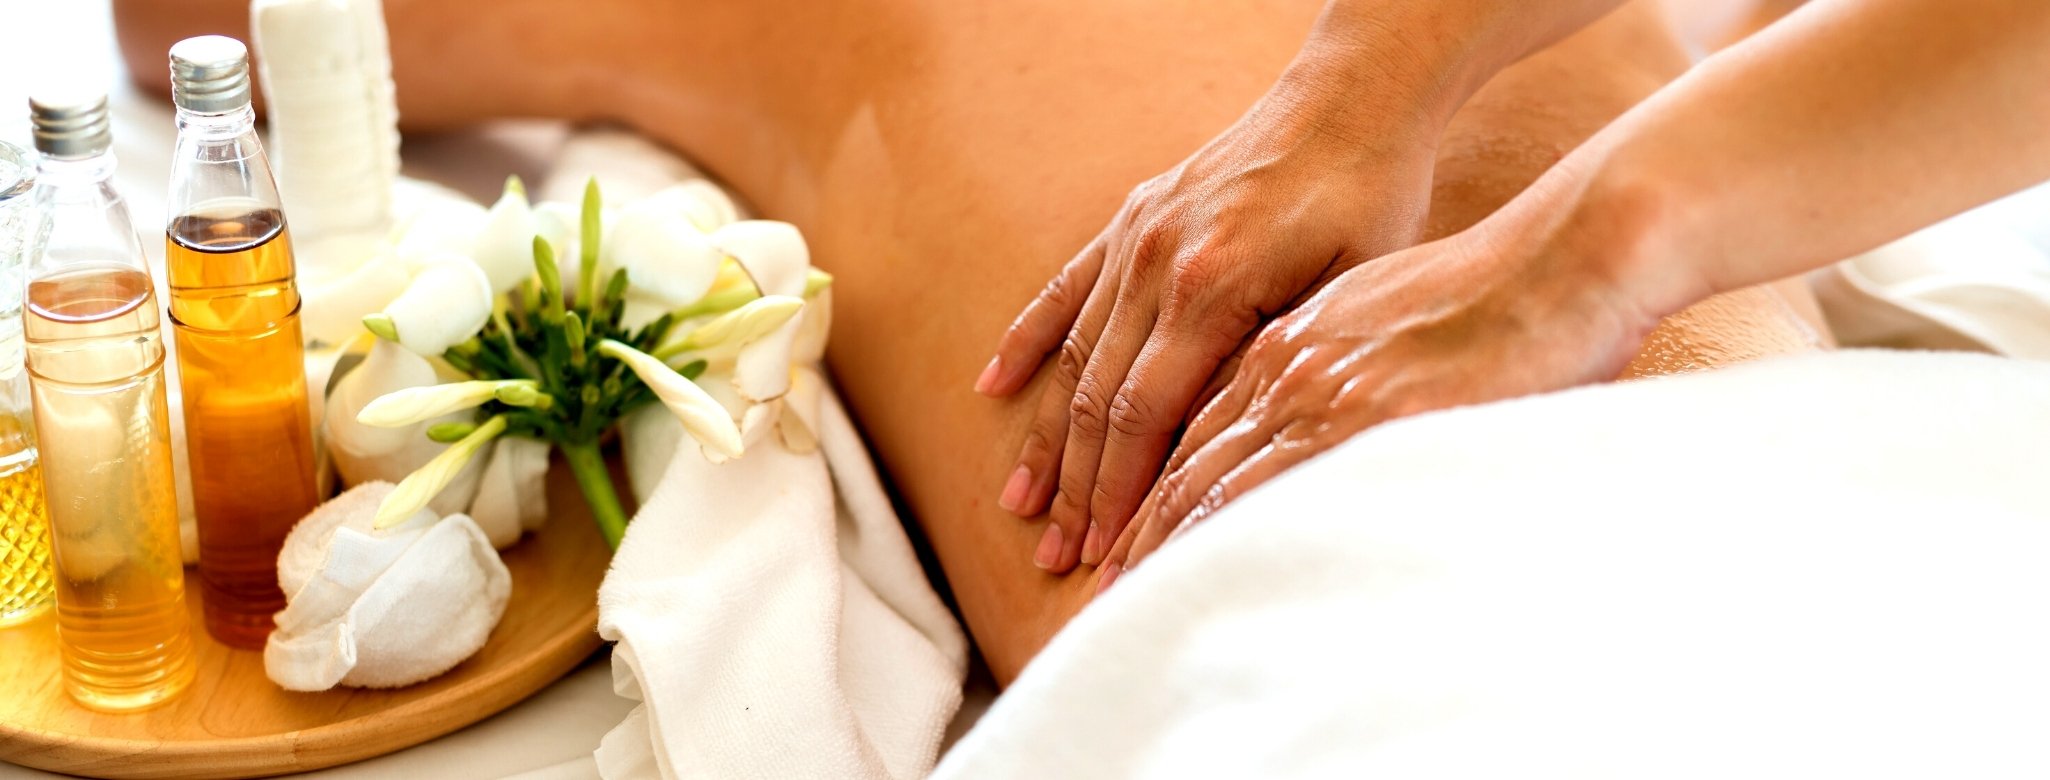 Relaxation Massage in the Hunter Valley, New South Wales